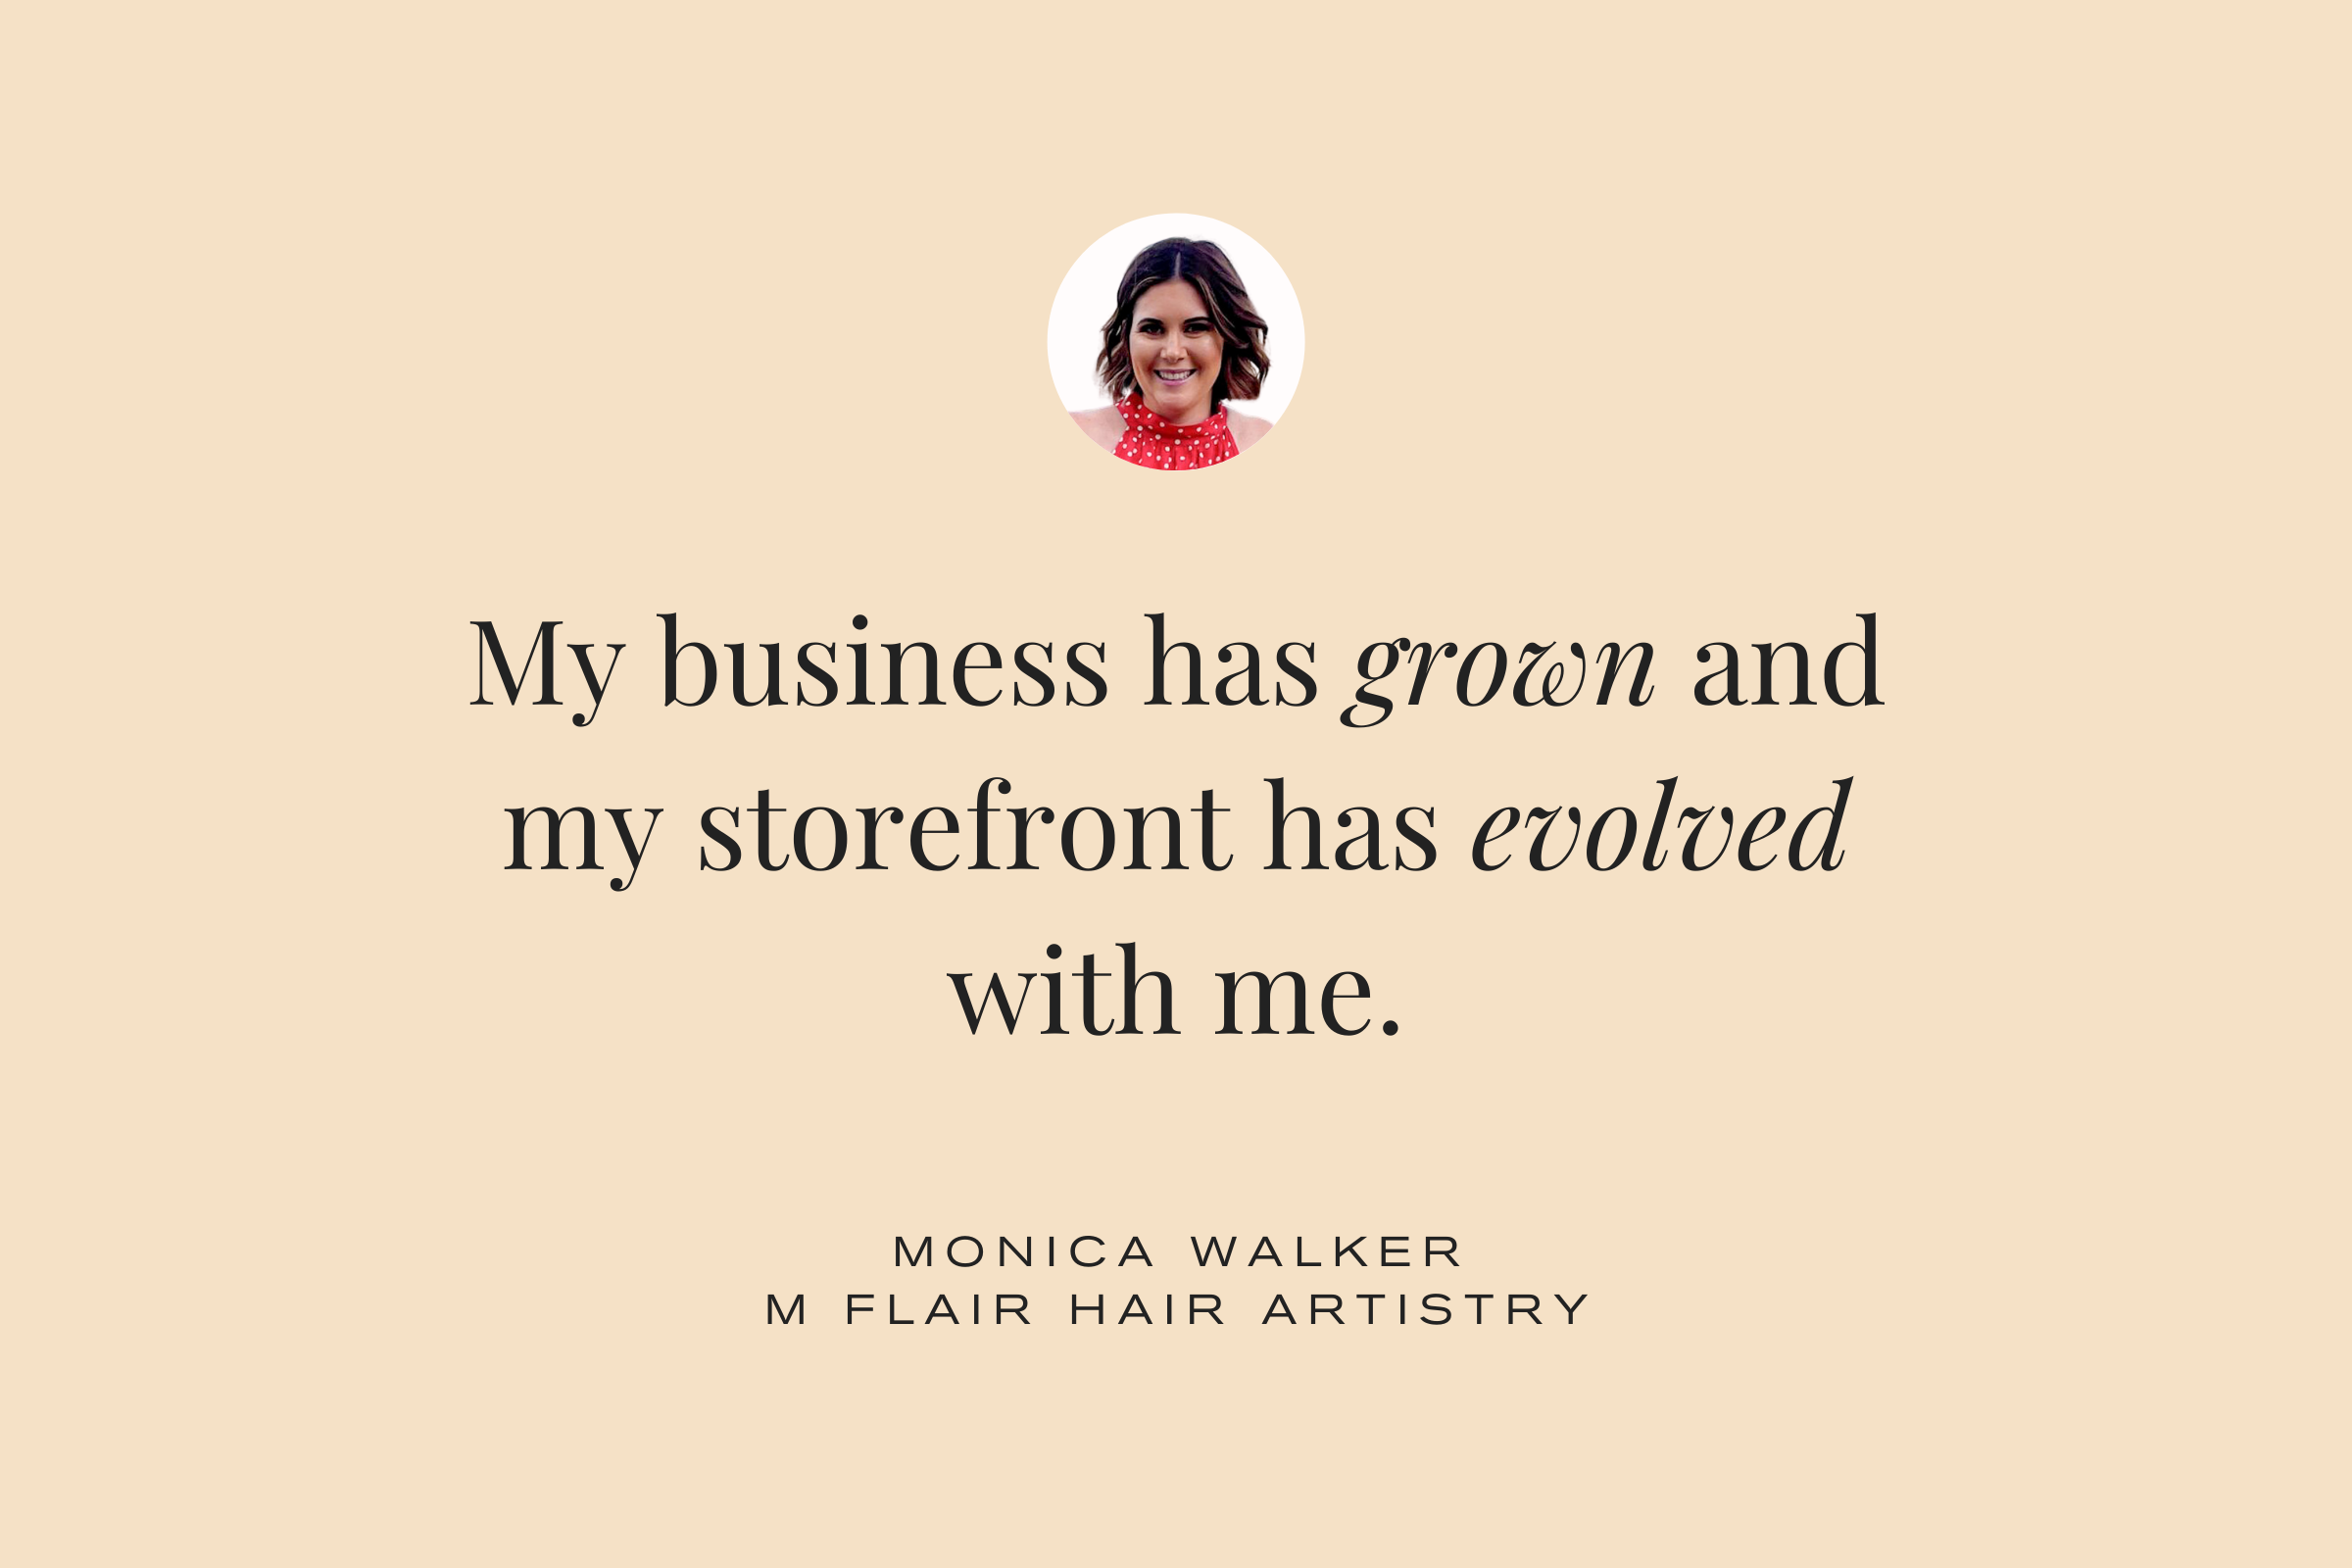 Monica Walker, M Flair Hair Artistry: My business has grown and my storefront has evolved with me.